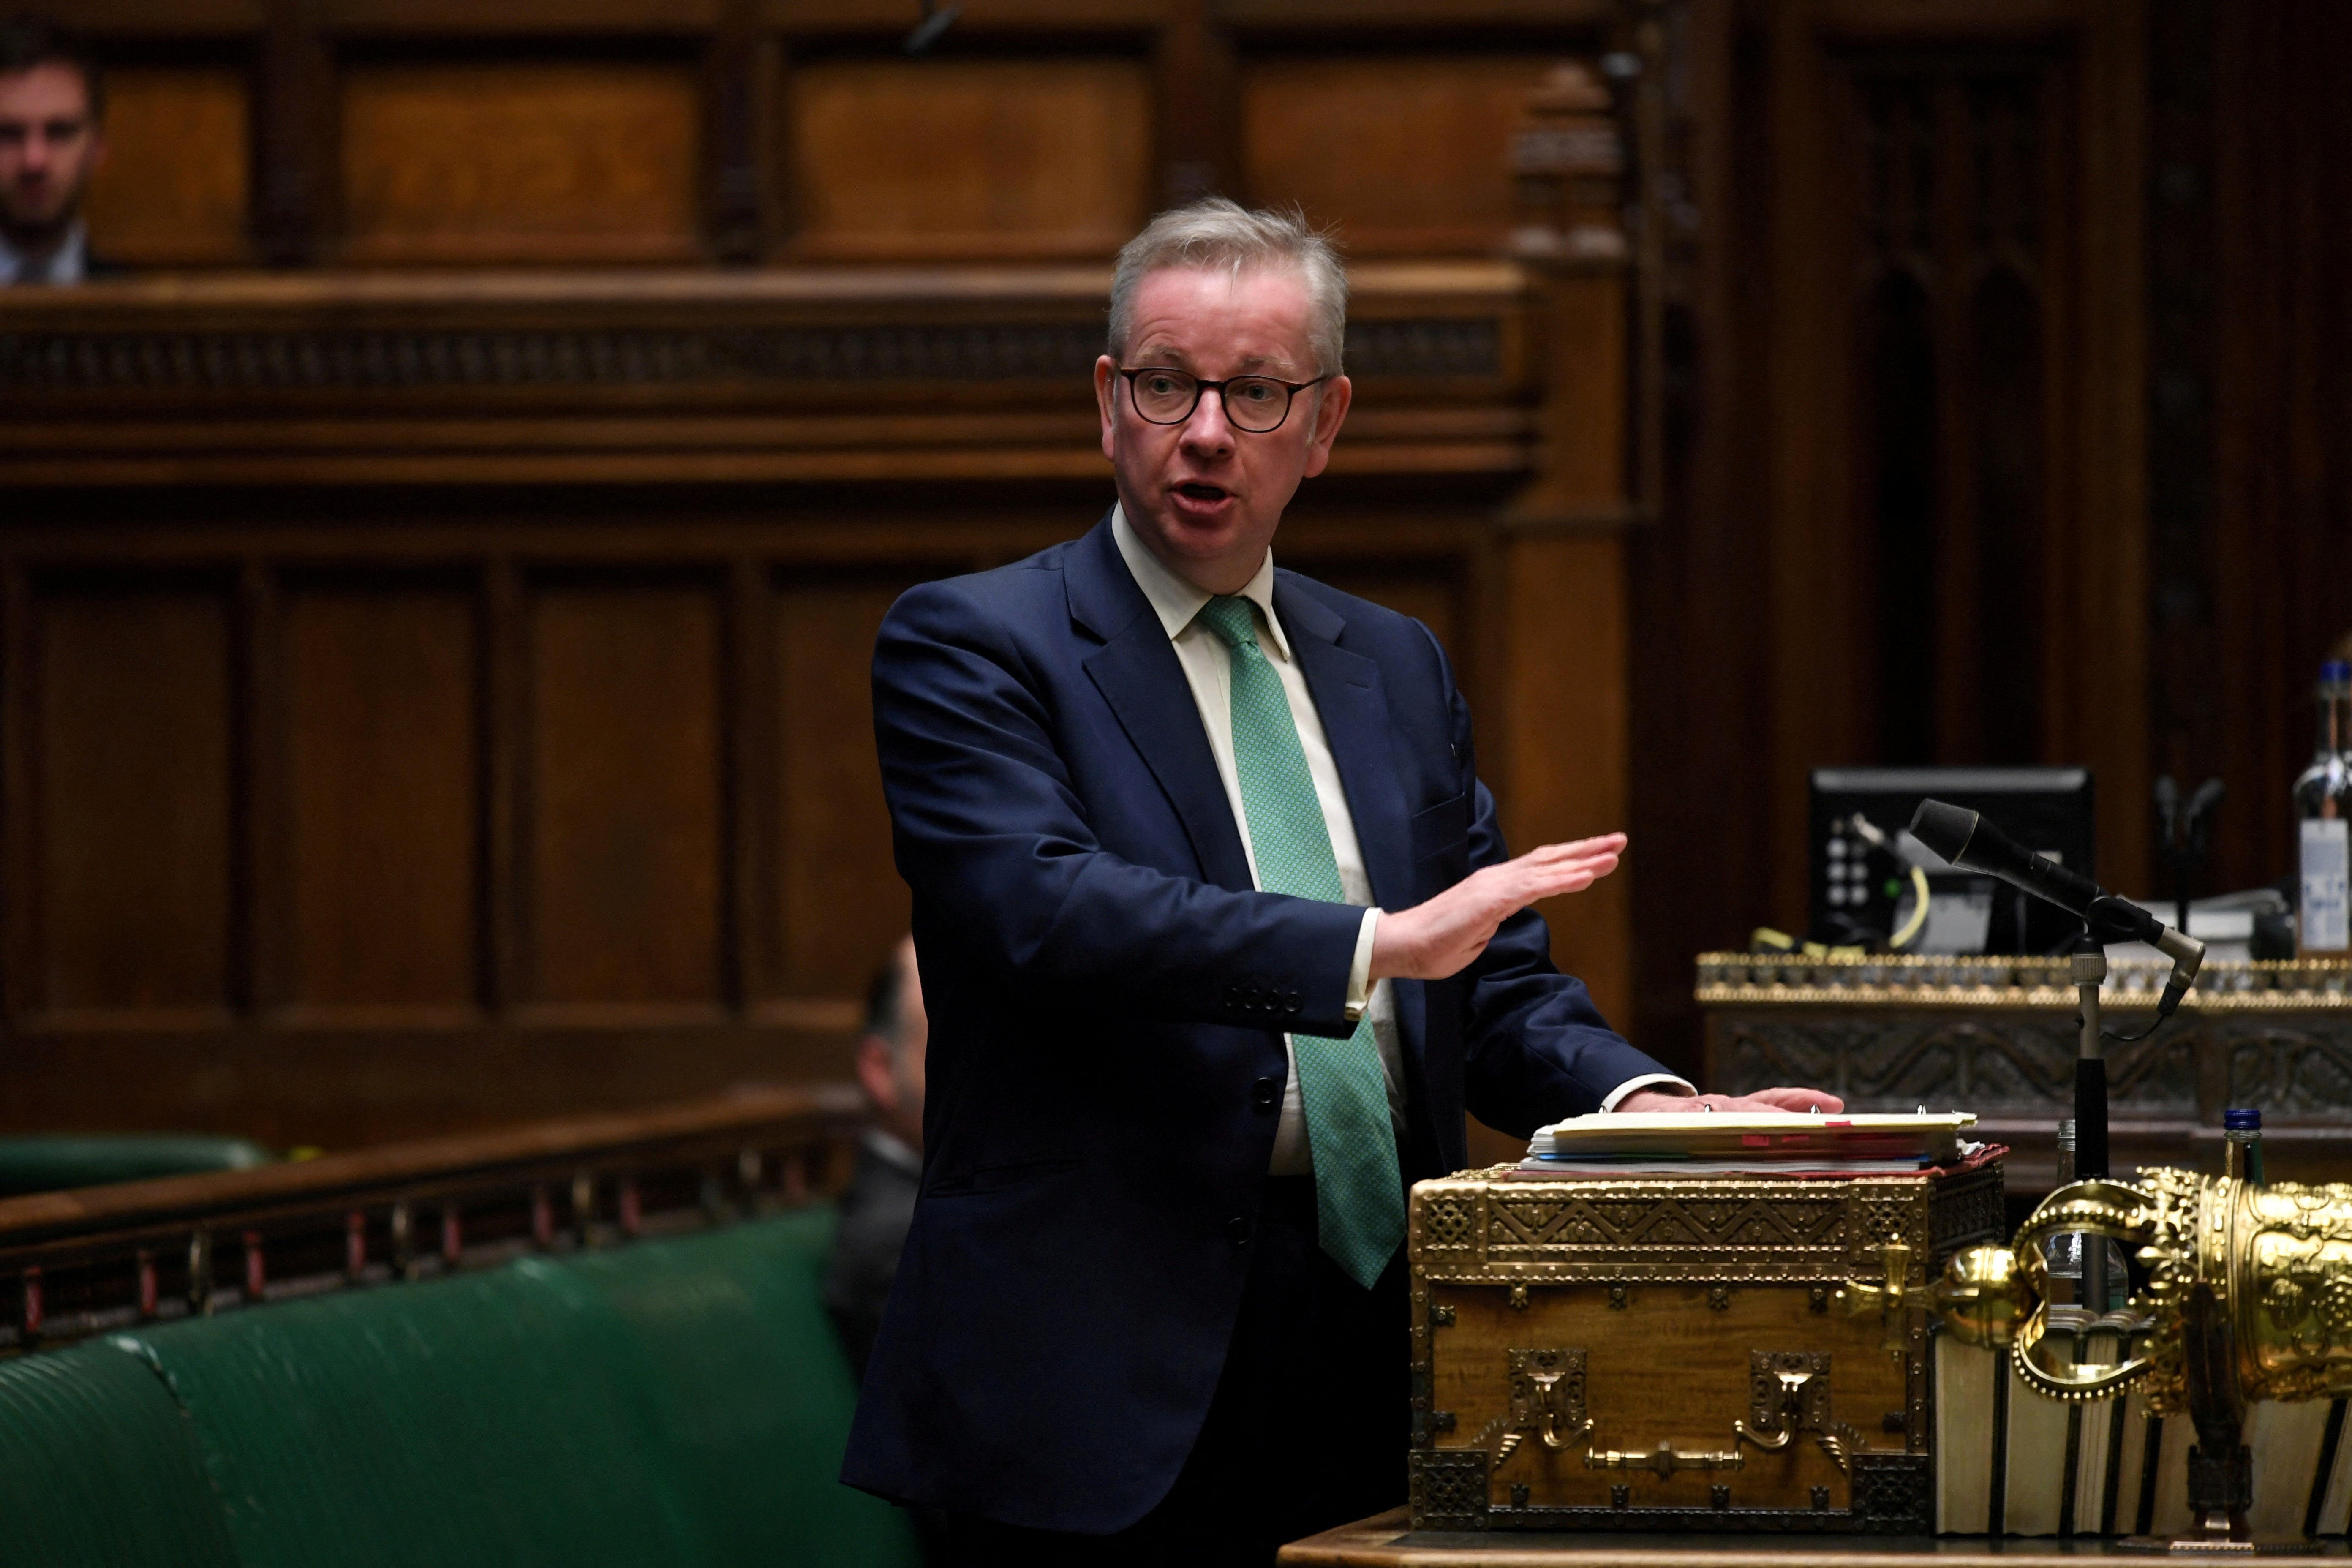 The criticism comes as Michael Gove finally unveils the levelling up strategy